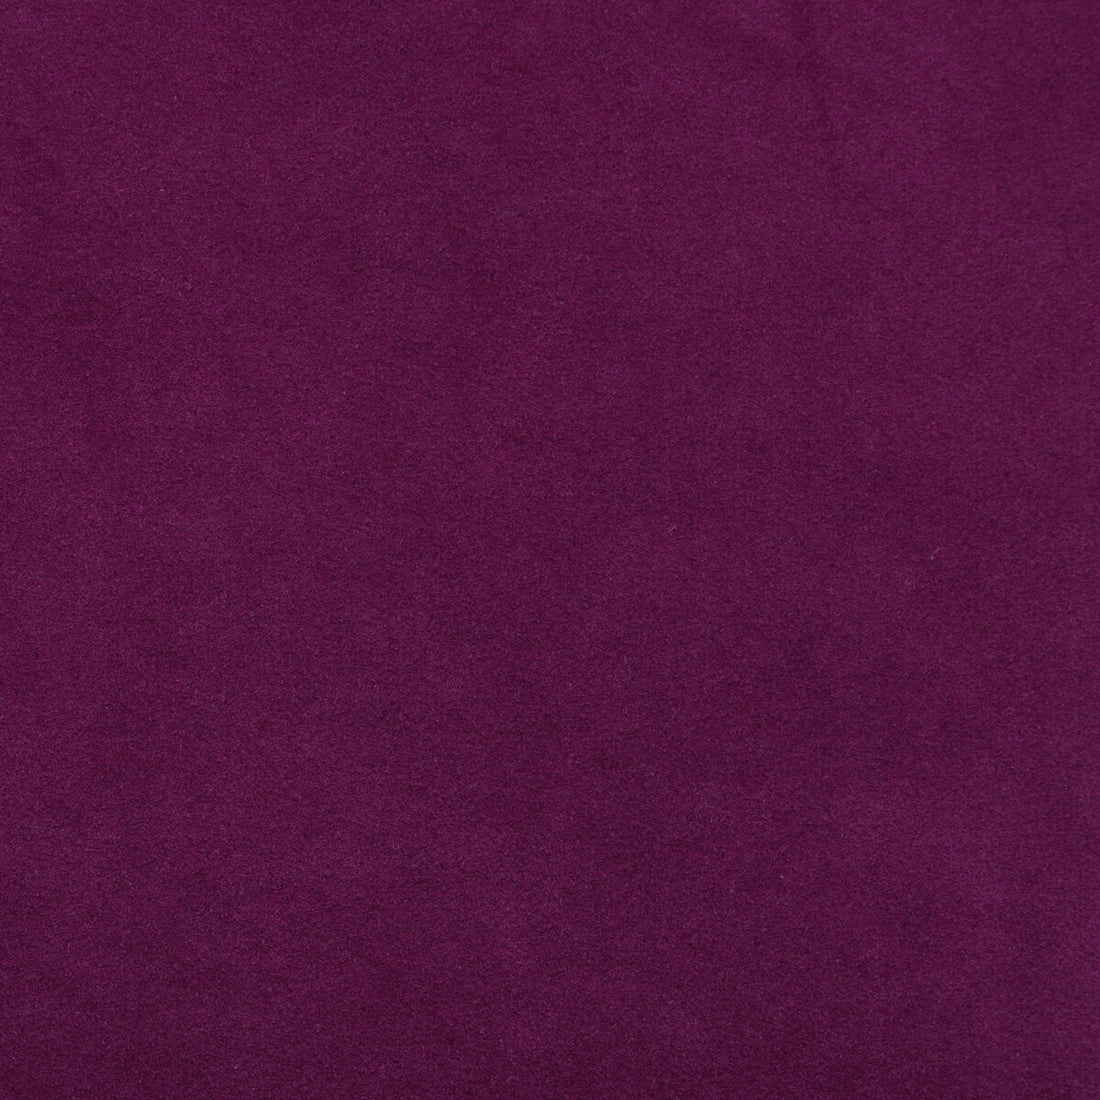 Ultimate fabric in orchid color - pattern 960122.97.0 - by Lee Jofa in the Ultimate Suede collection